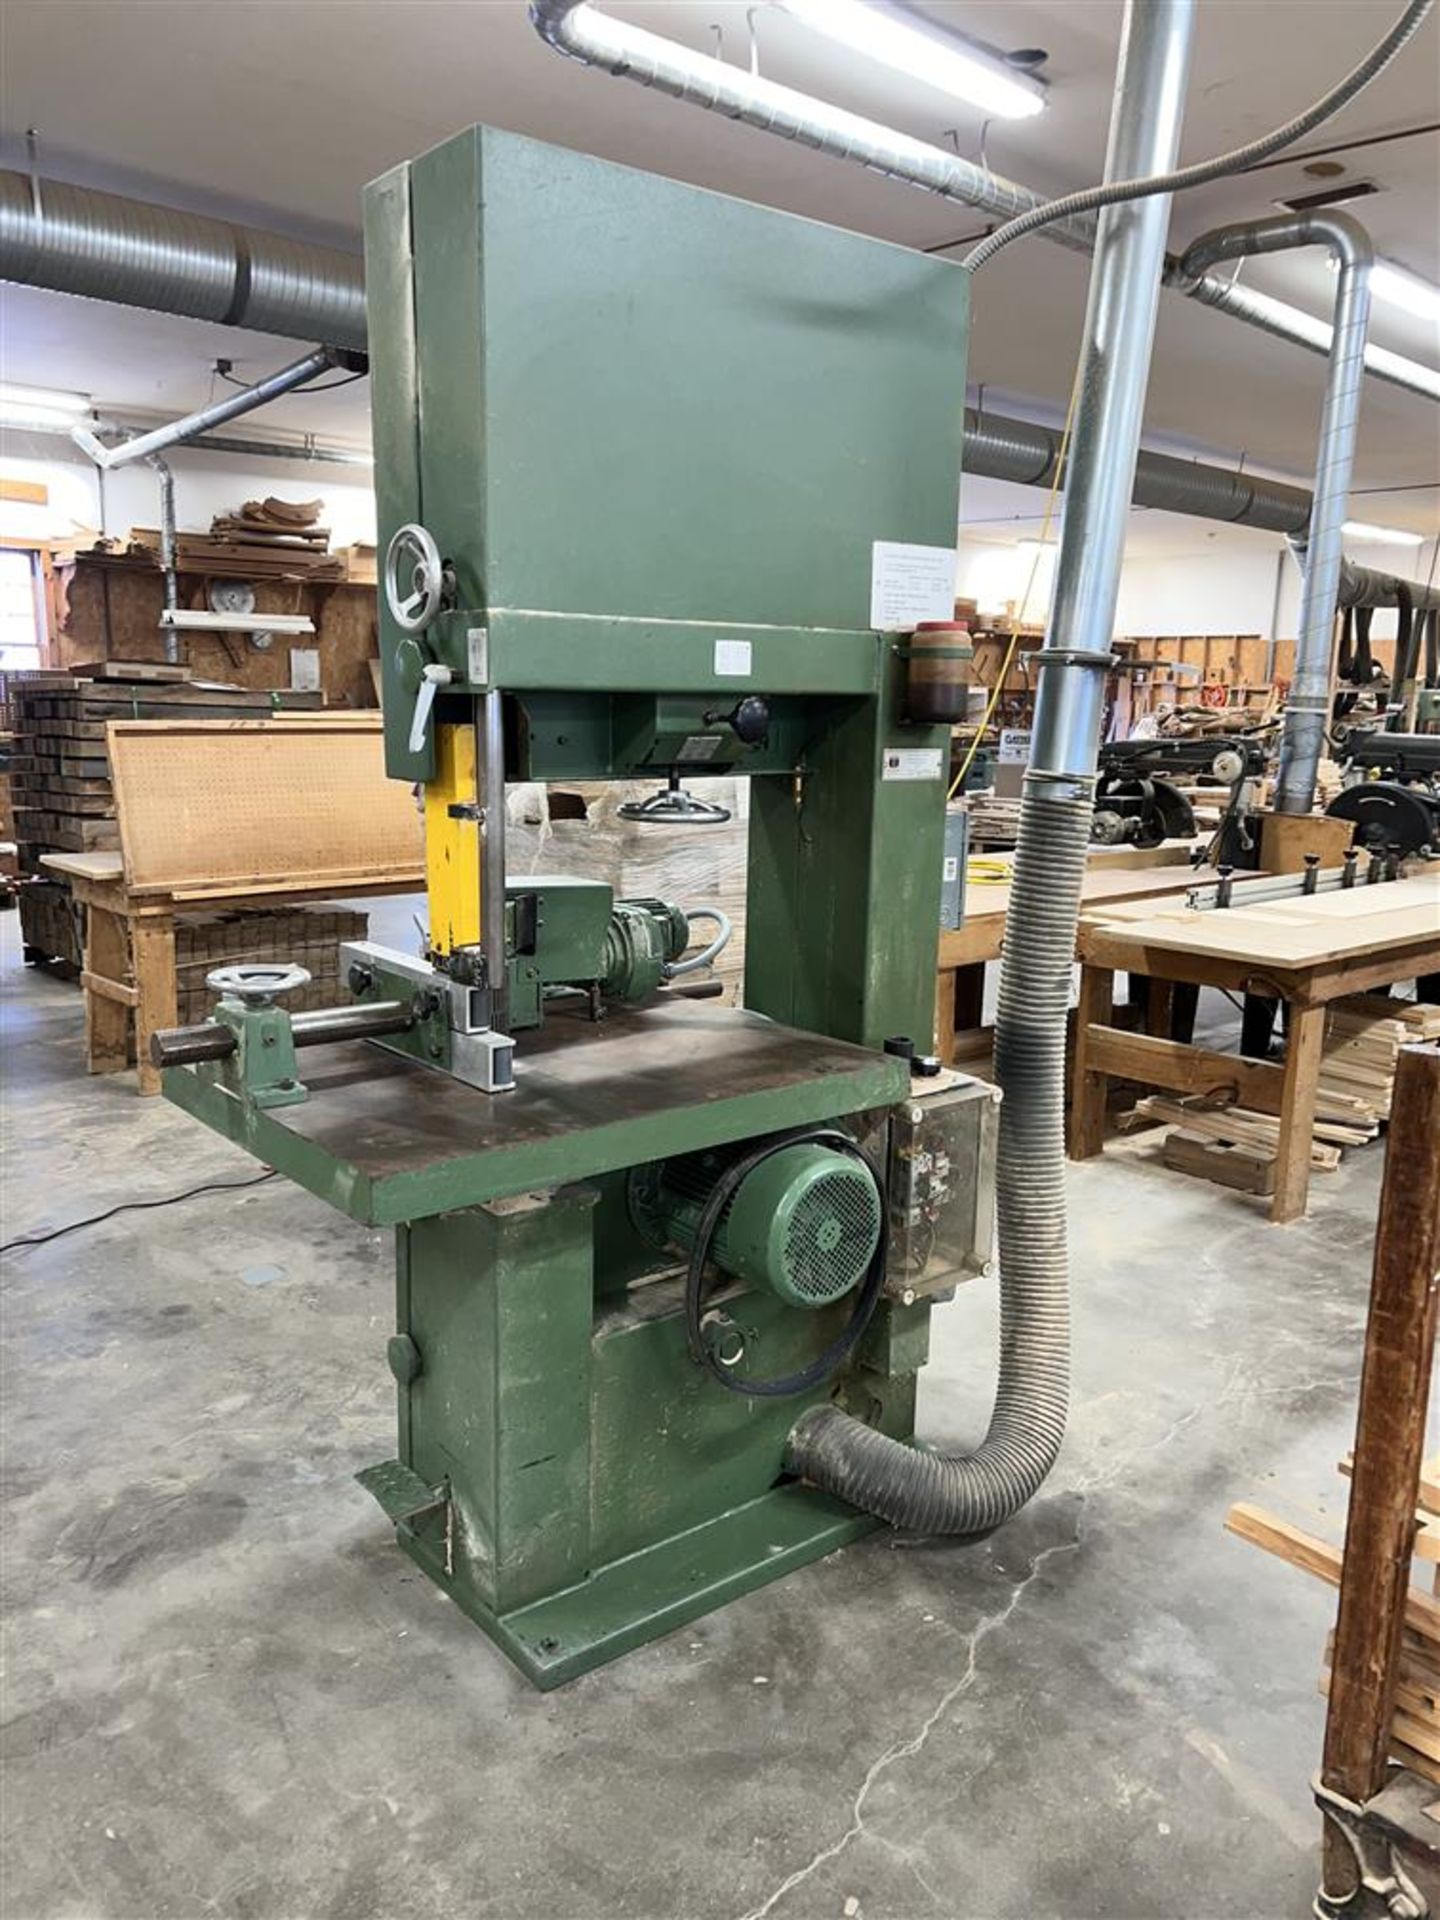 WADKIN POWER BAND RESAW WITH POWER FEED, 3PH, S/N: HD91952 - Image 3 of 10